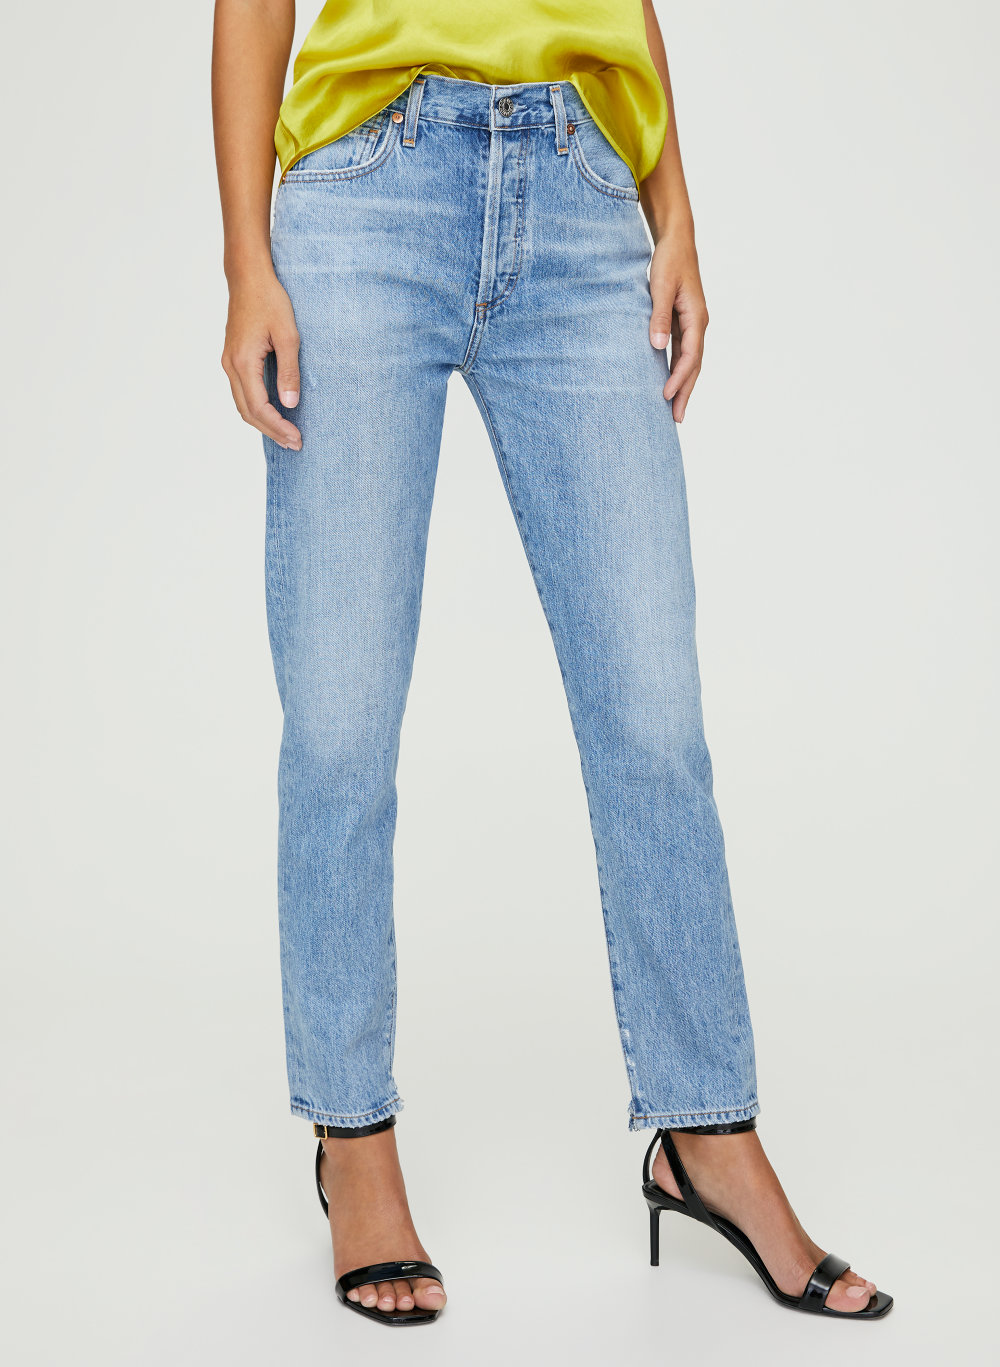 citizens of humanity liya high rise jeans